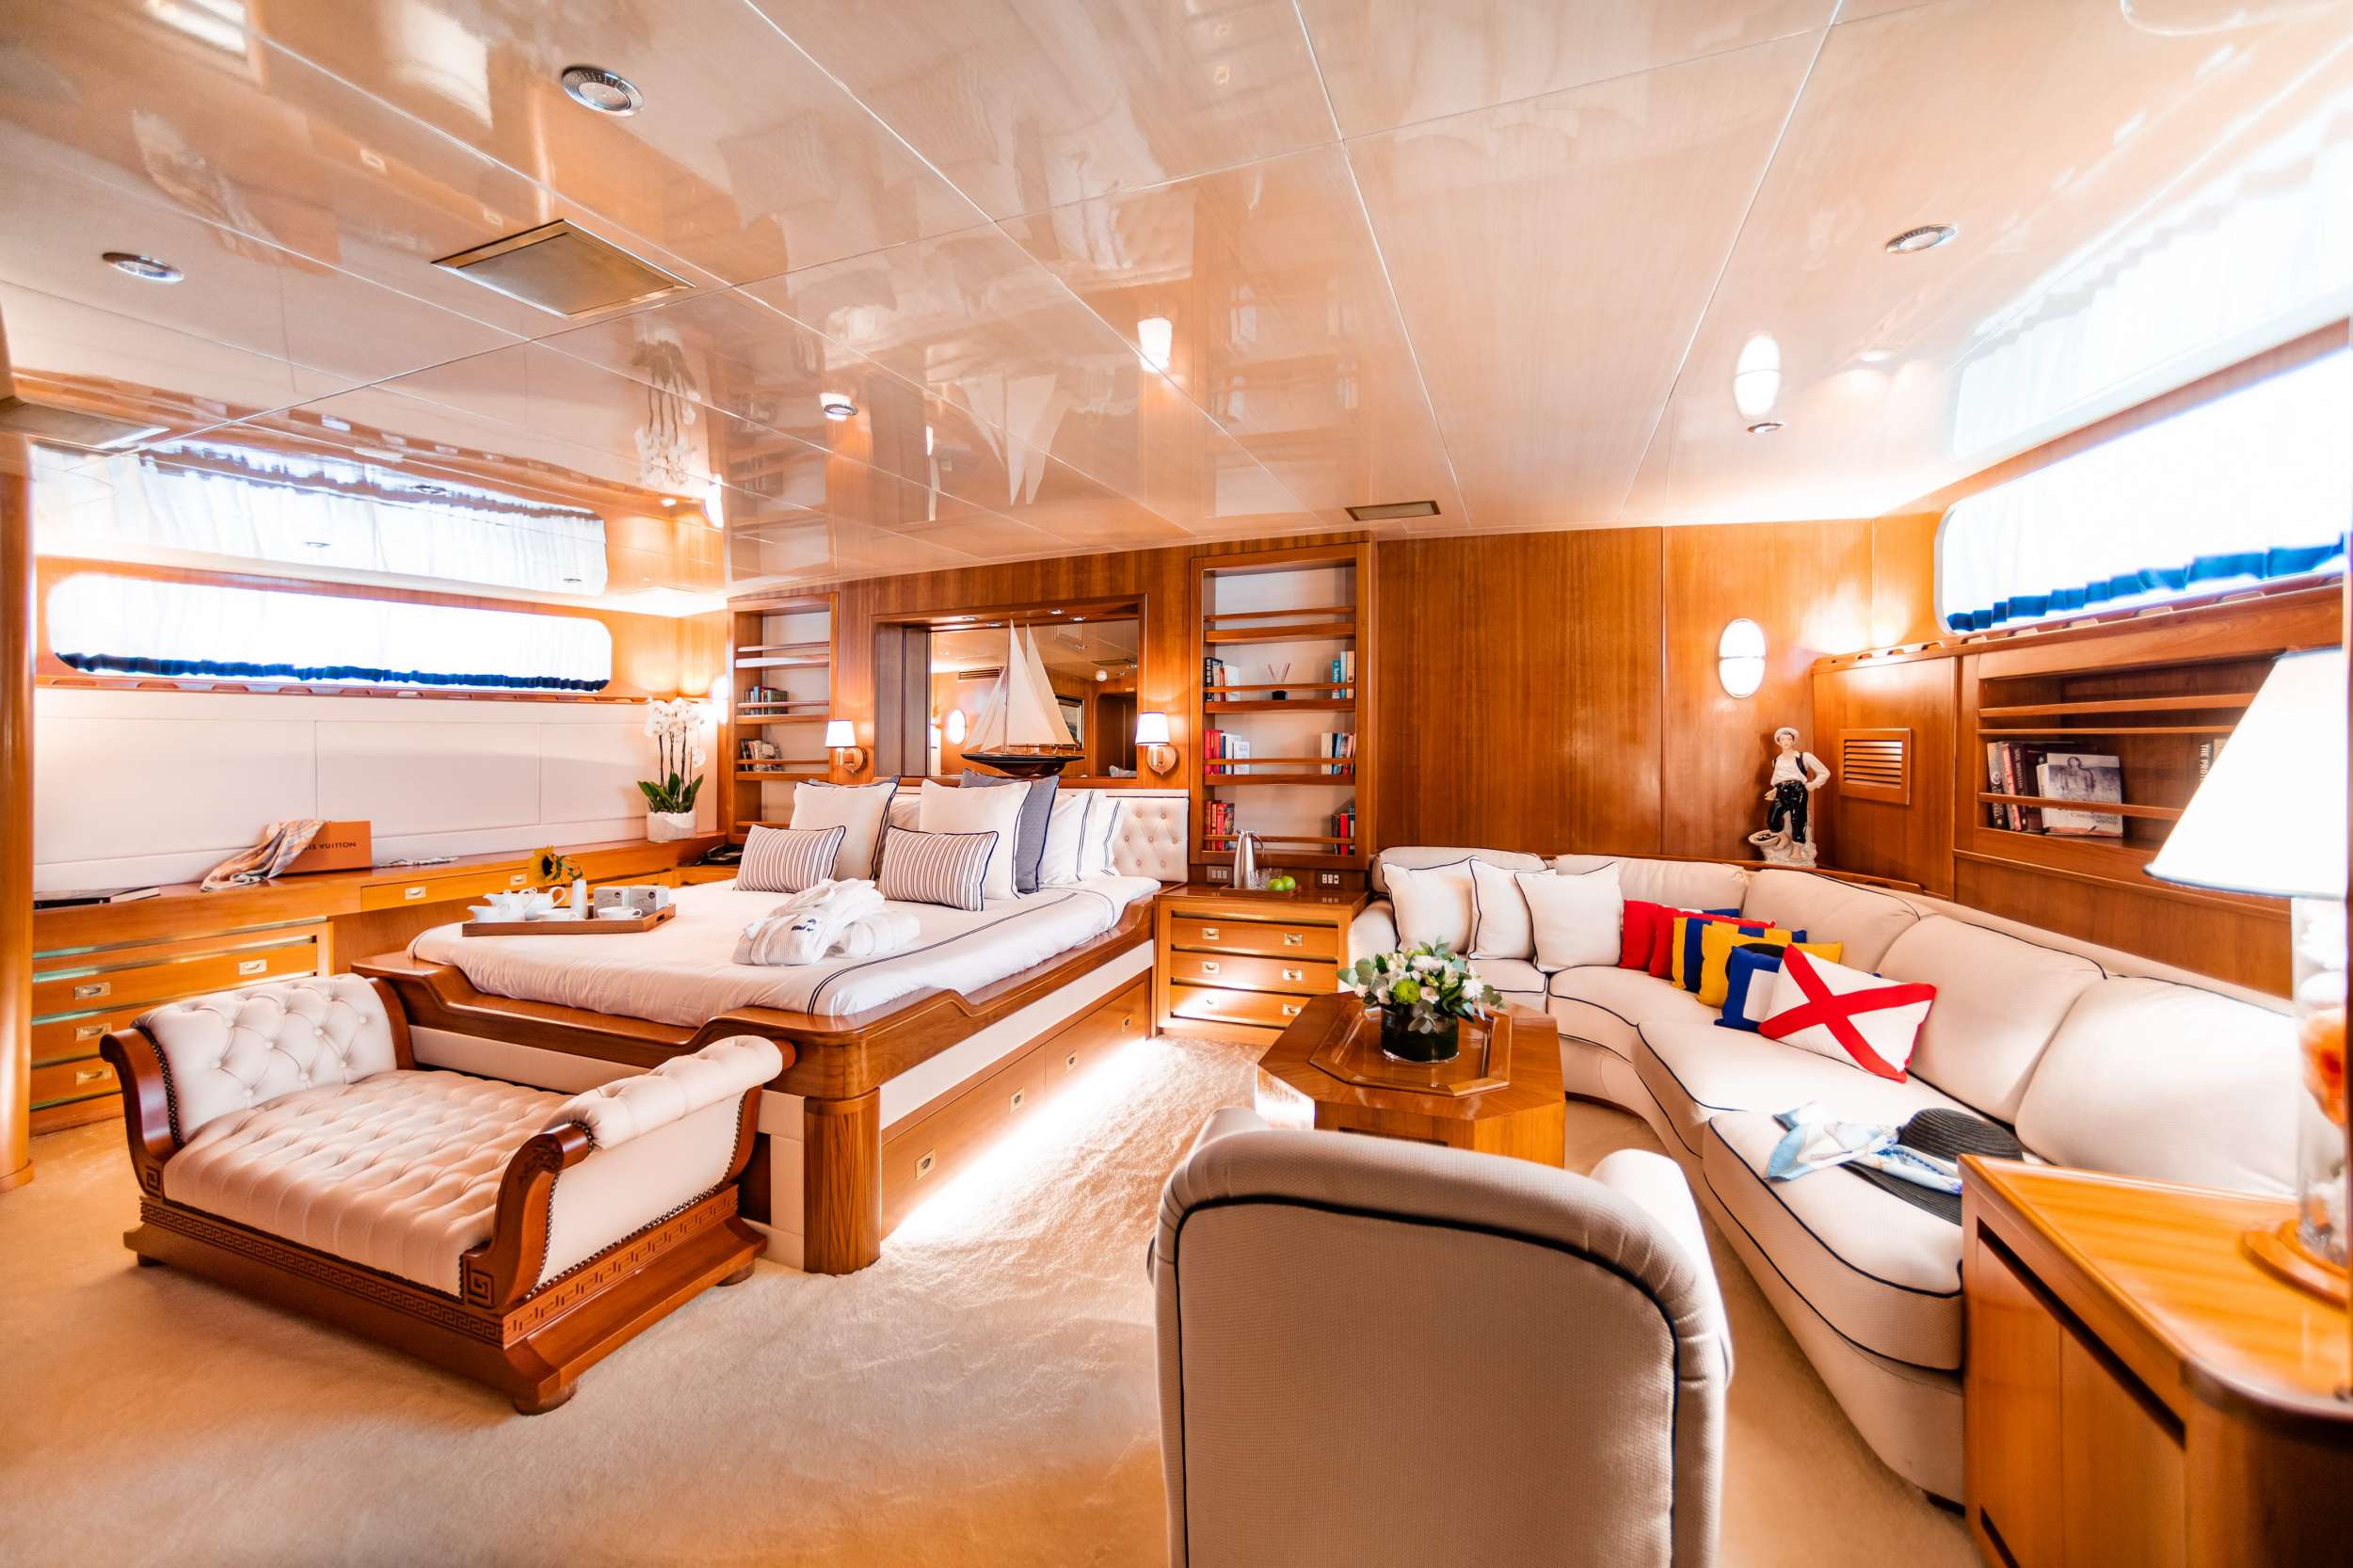 WIND OF FORTUNE Yacht Charter - Master Suite